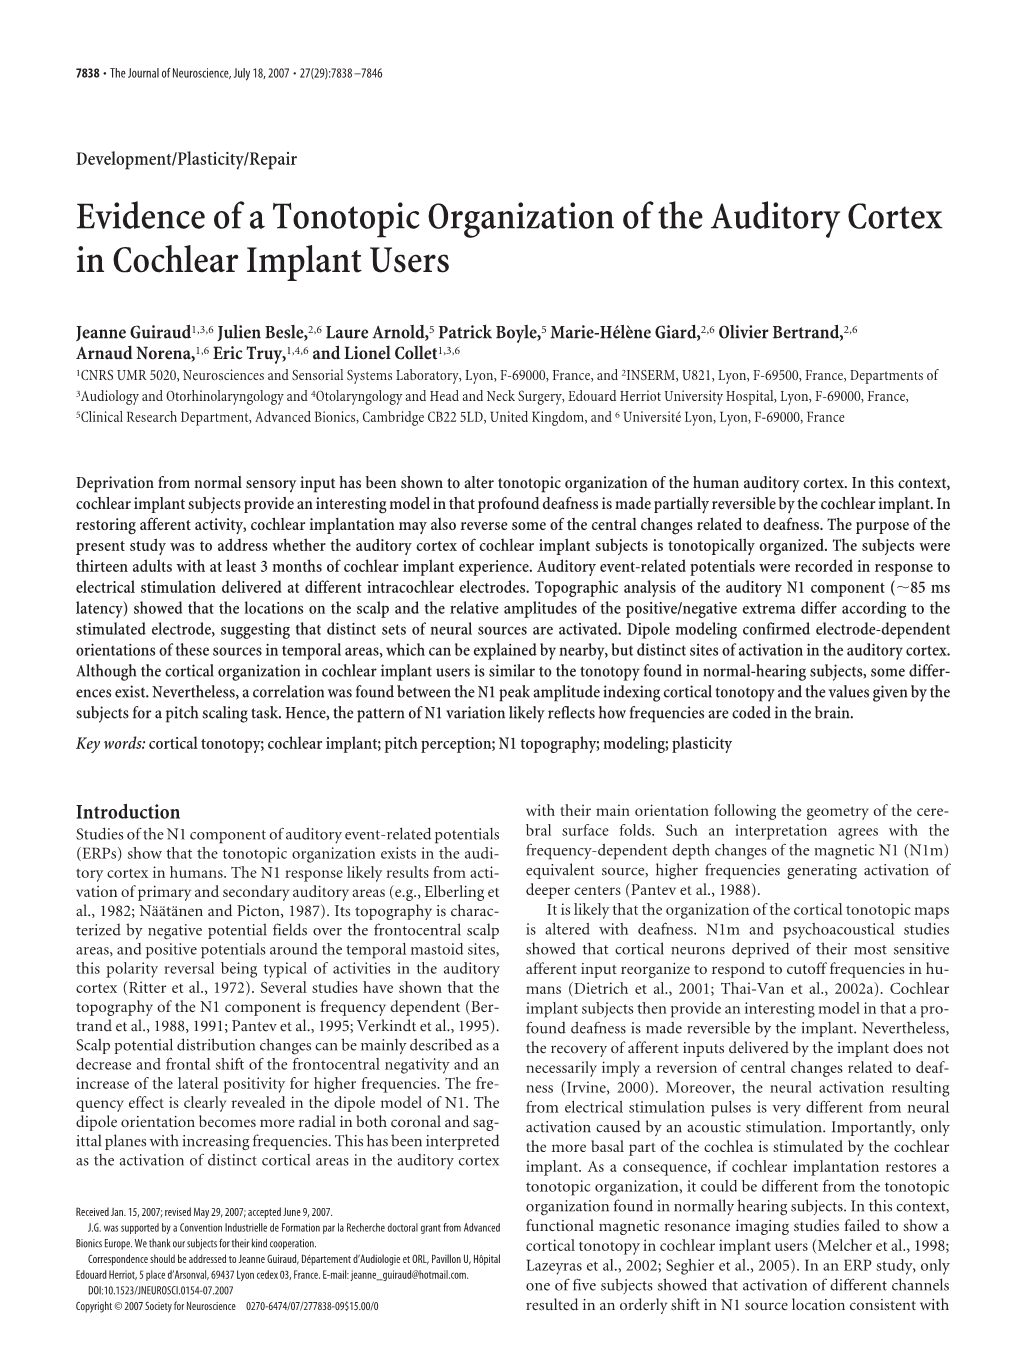 Evidence of a Tonotopic Organization of the Auditory Cortex in Cochlear Implant Users